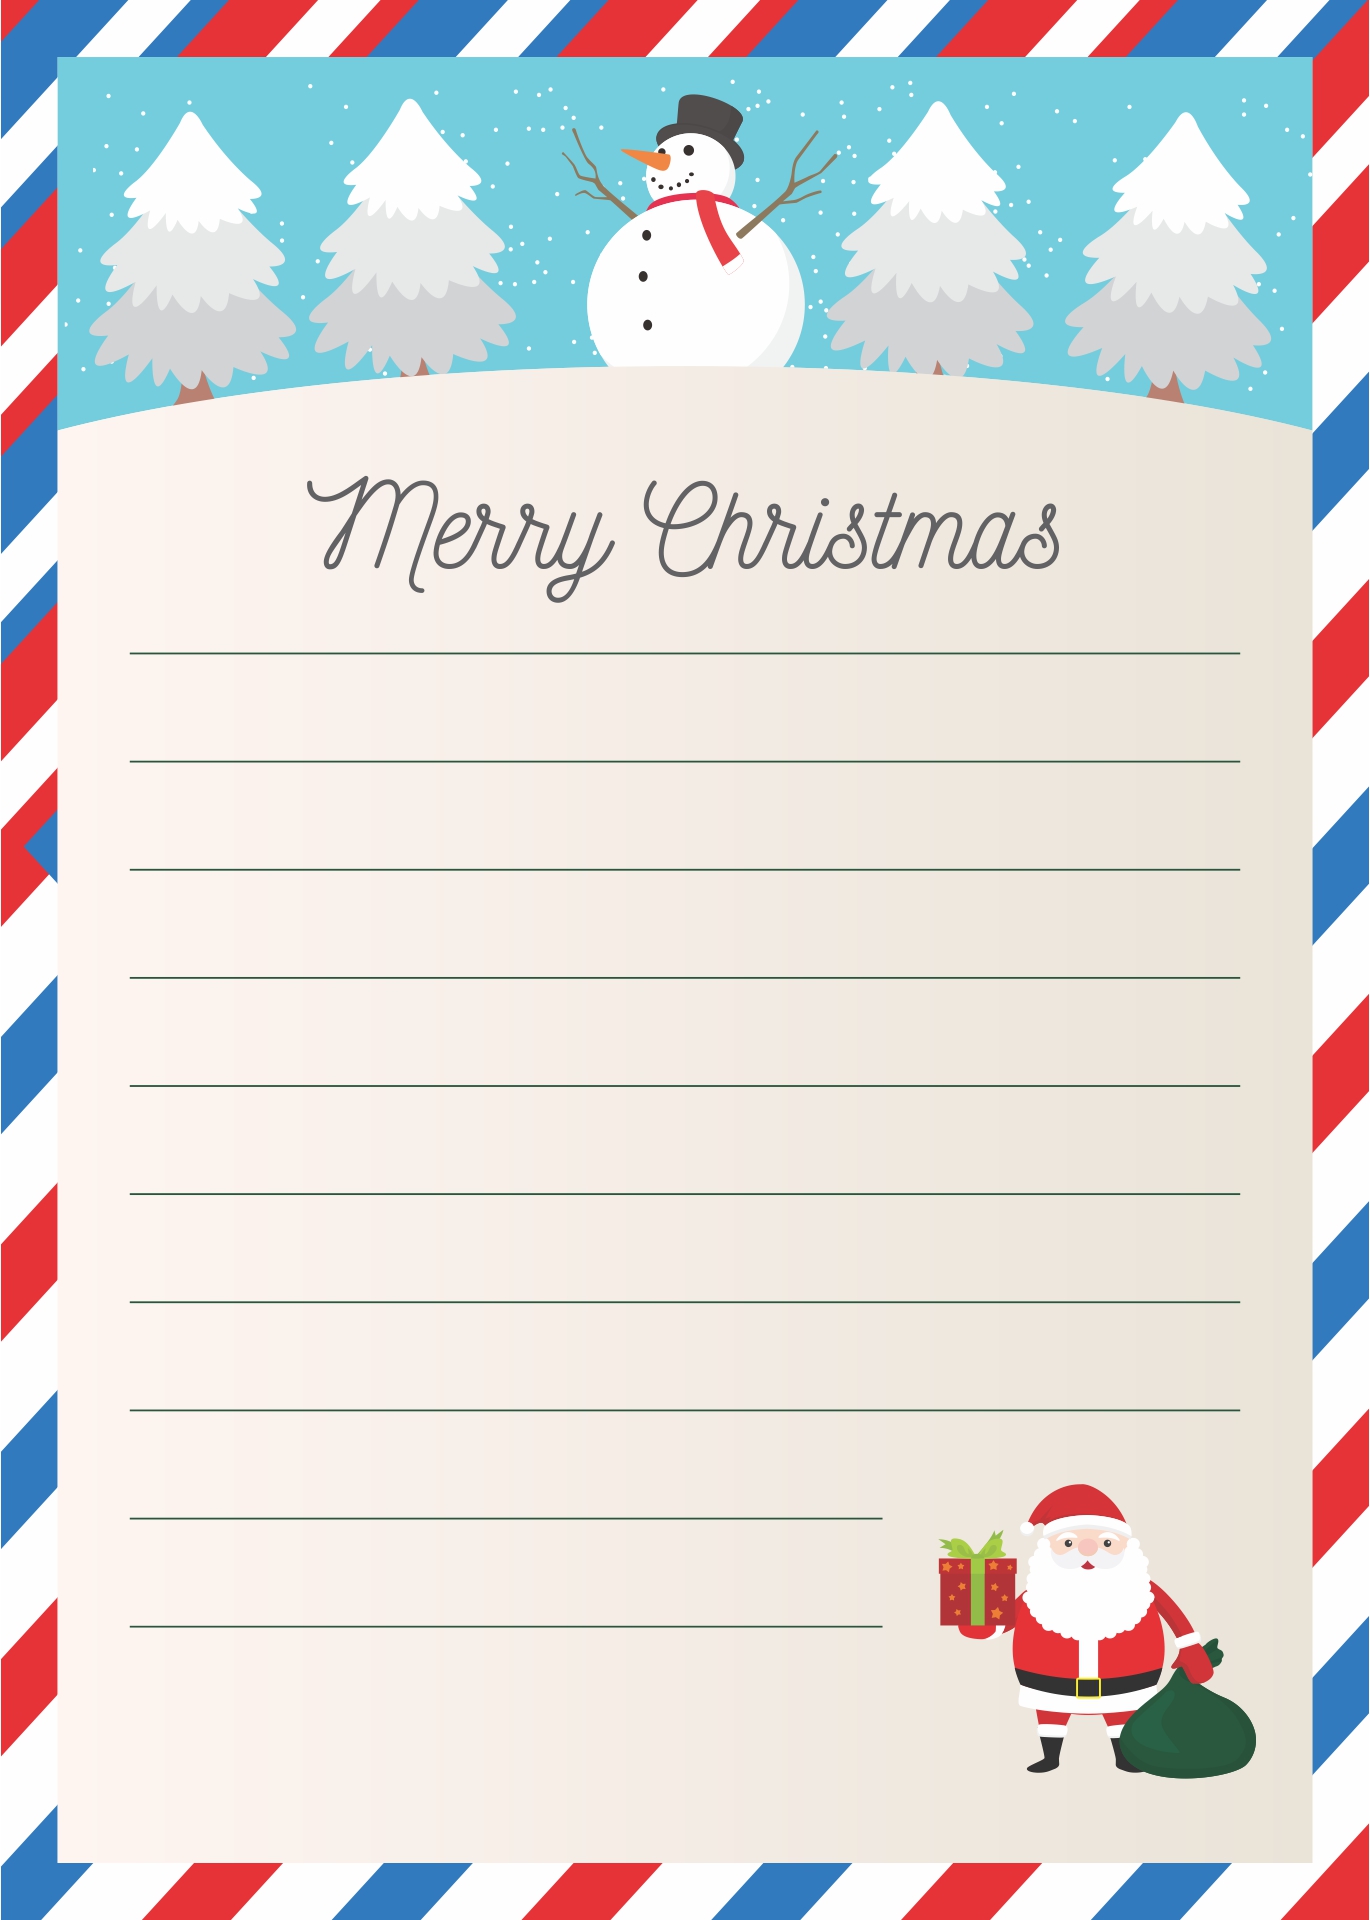 6 Best Images of Printable Christmas Letter To Santa ...